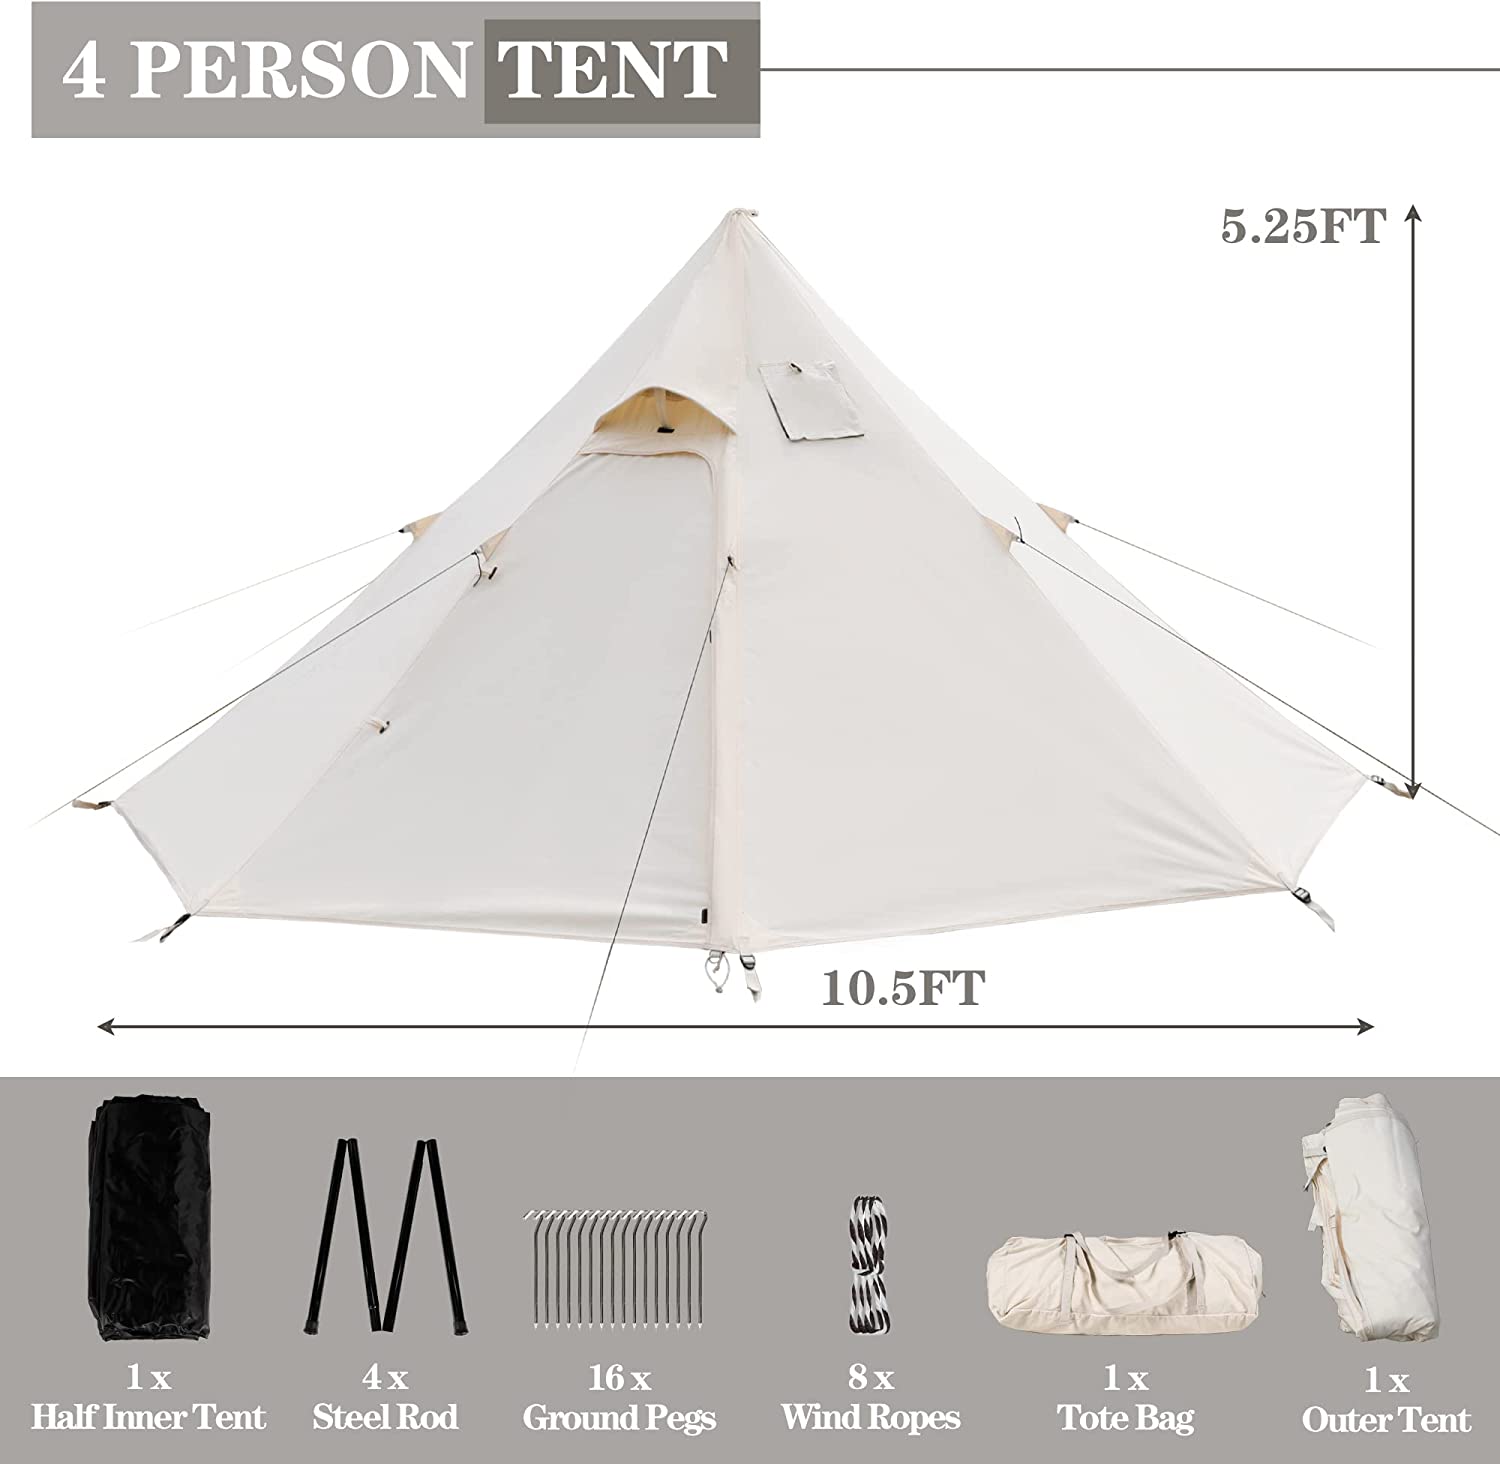 Coewske Hot Tent with Stove Jack Hole 4 Season Canvas Camping Tent for Solo Winter Family Hiking Hunting， White